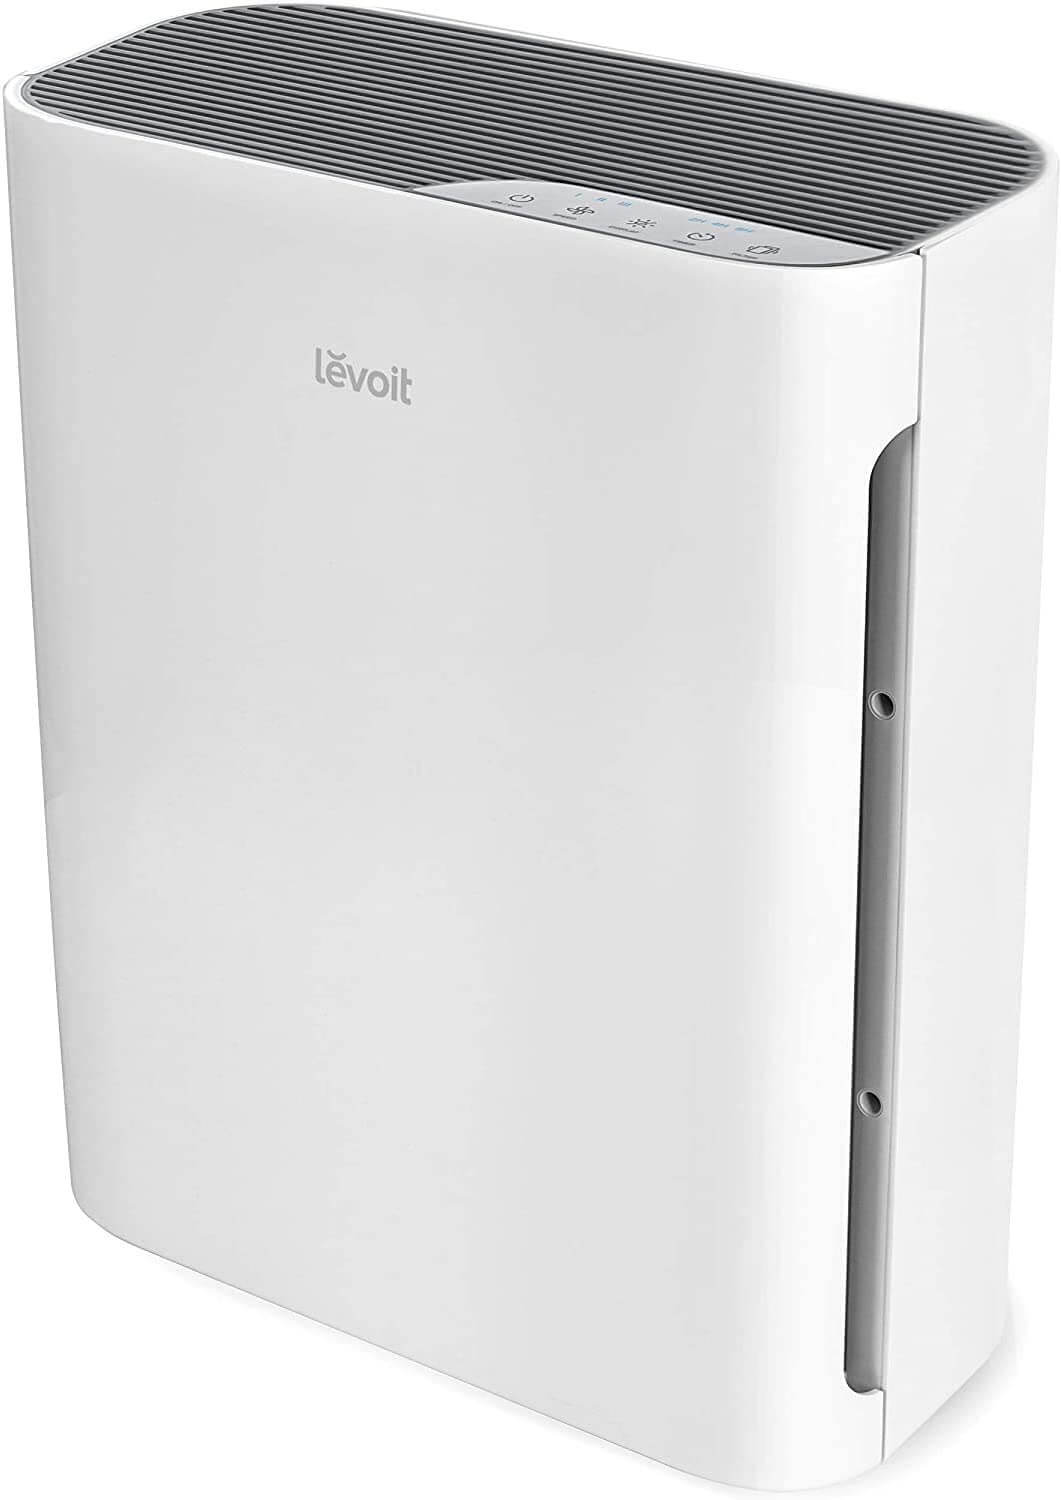 Levoit Air Purifiers for Large Room with Washable Filters